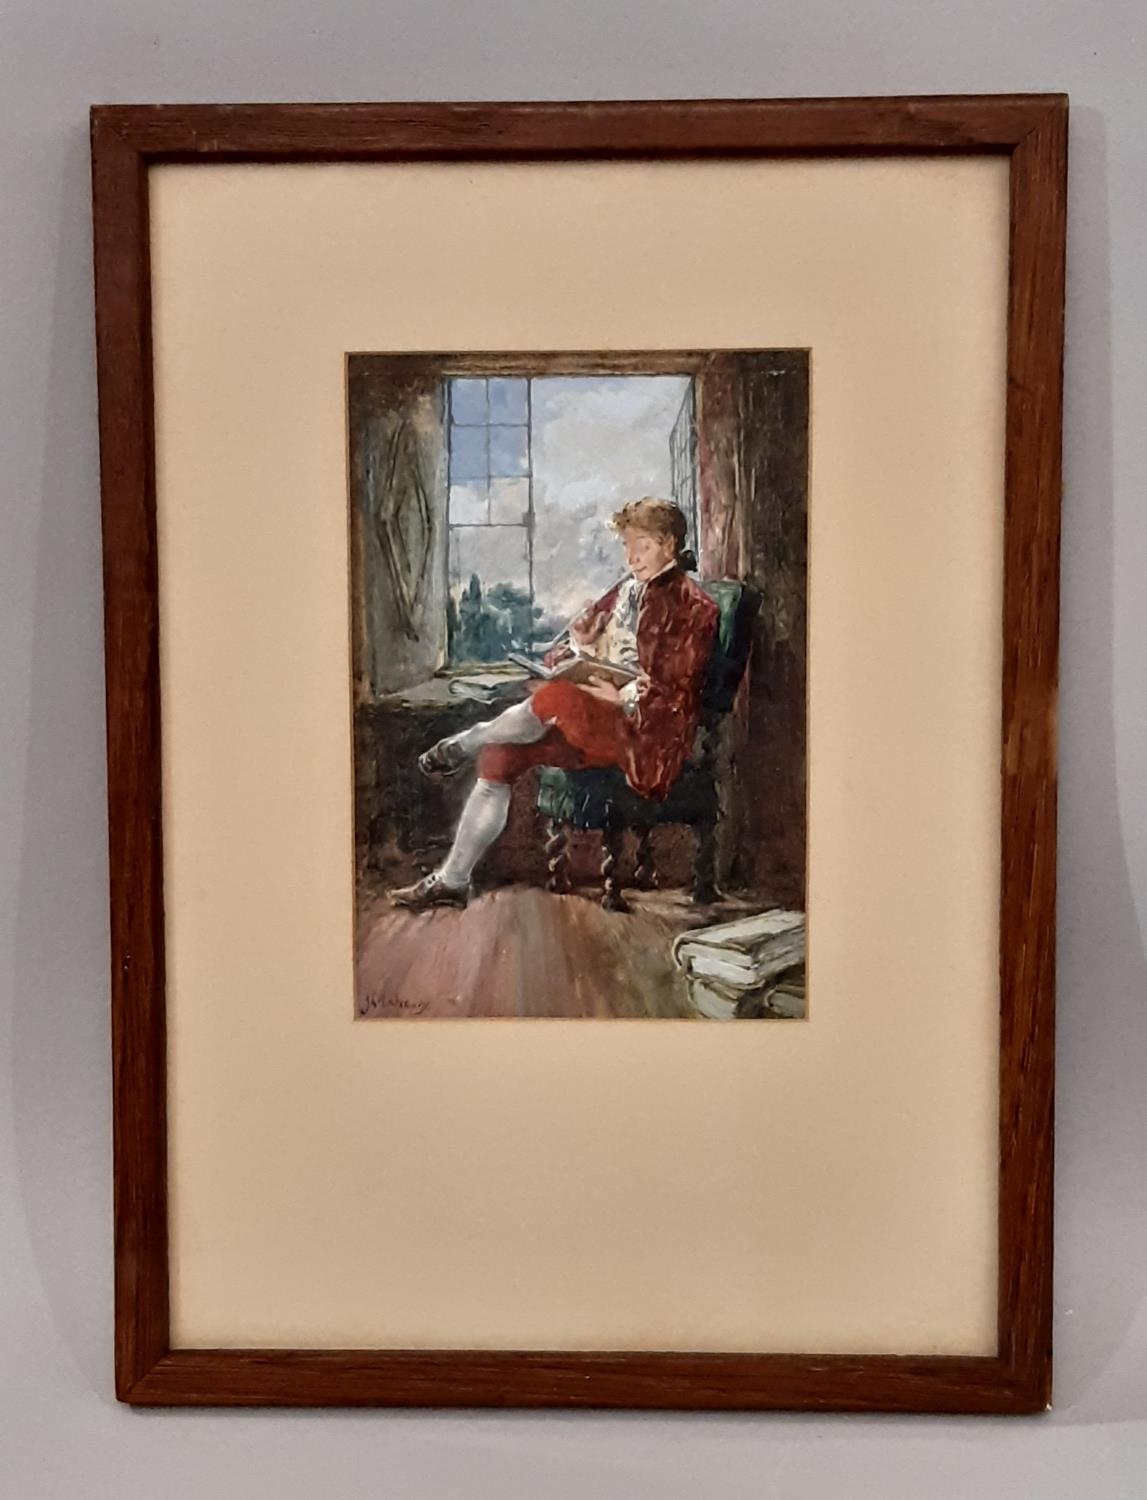 James Mahoney (Irish, c.1810-1879) - A Gentleman reading by the window while smoking a clay pipe,